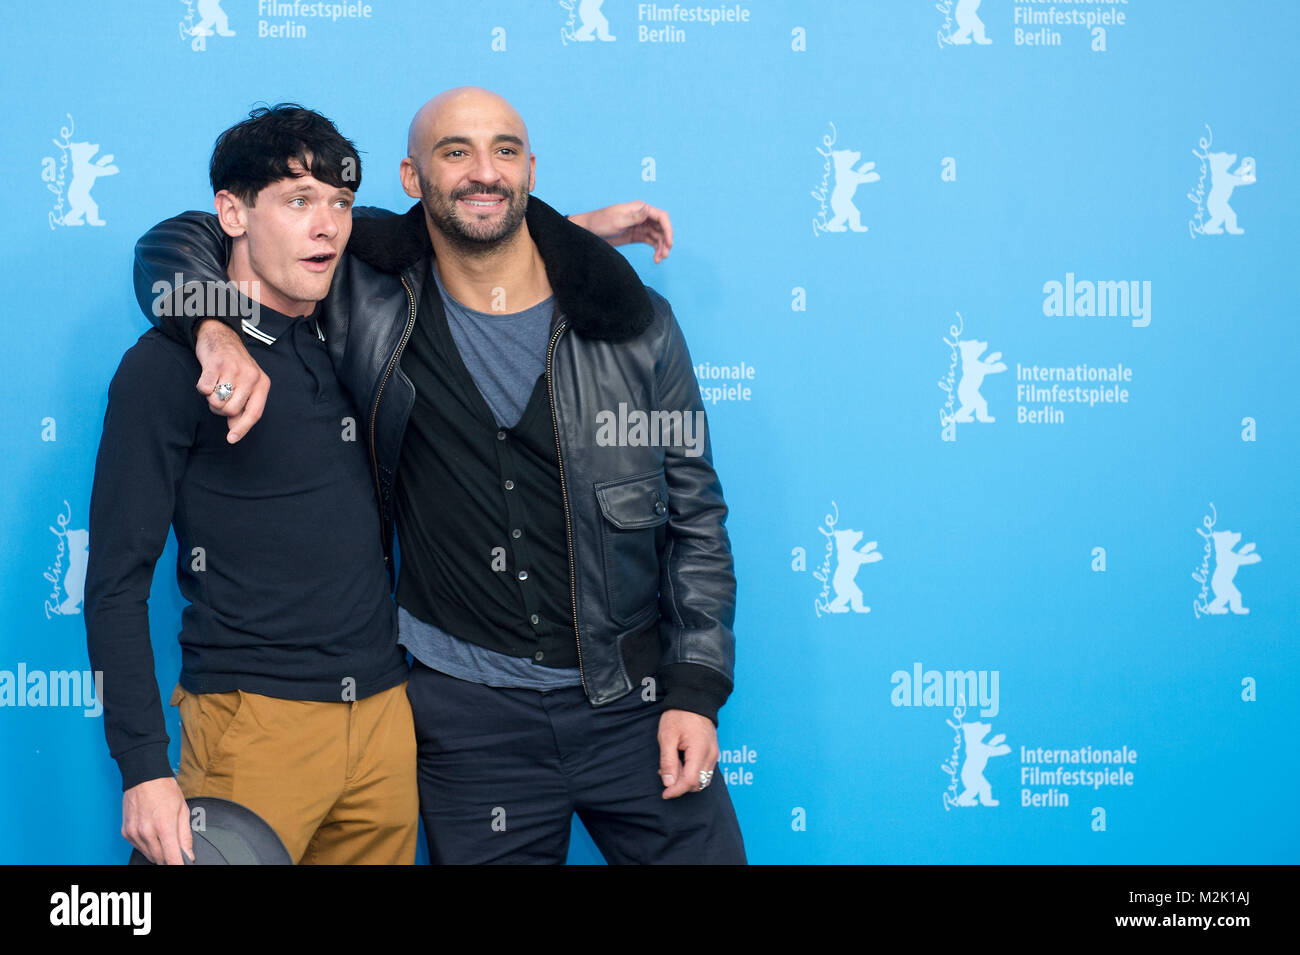 64th Berlinale International Film Festival receives the Film ’71 with the director Yann Demange actors David Wilmot ,Charlie Murphy ,Sam Reid ,Jack O’Connell, Barry Keoghan and the producers Gregory Burke,Robin Gutch,Angus Lamont. Stock Photo